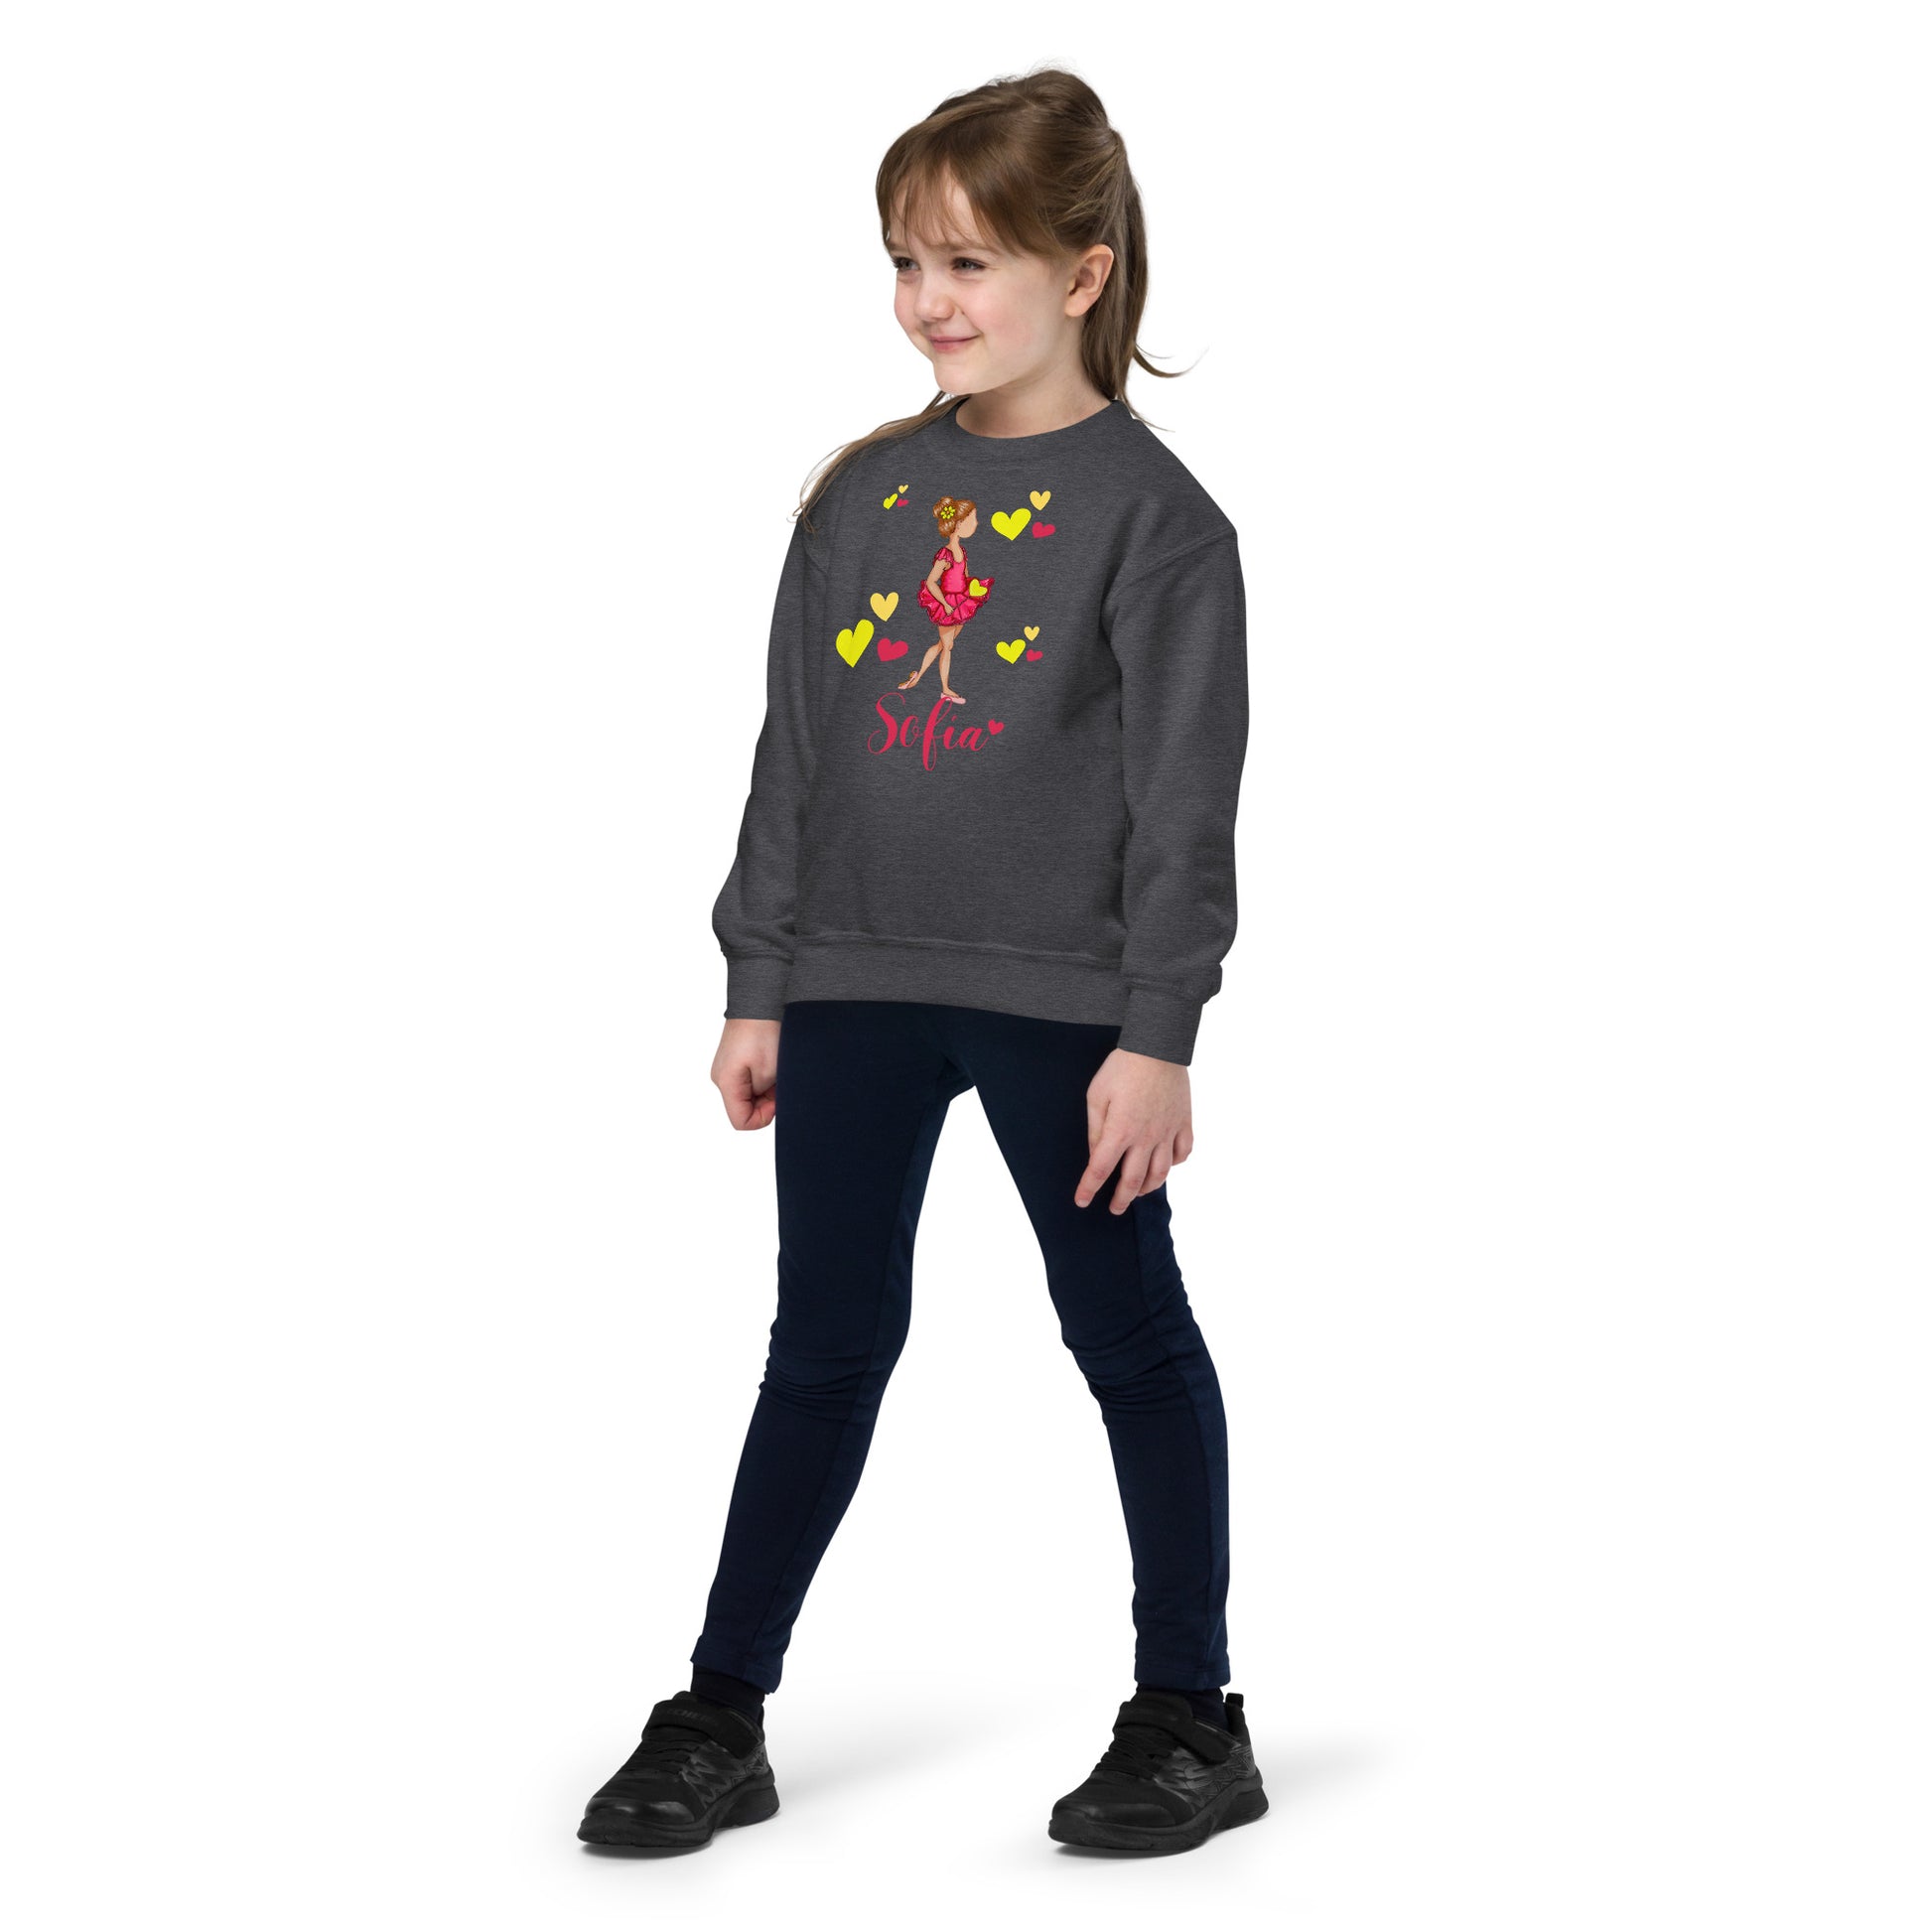 a young girl wearing a sweatshirt with a cartoon character on it